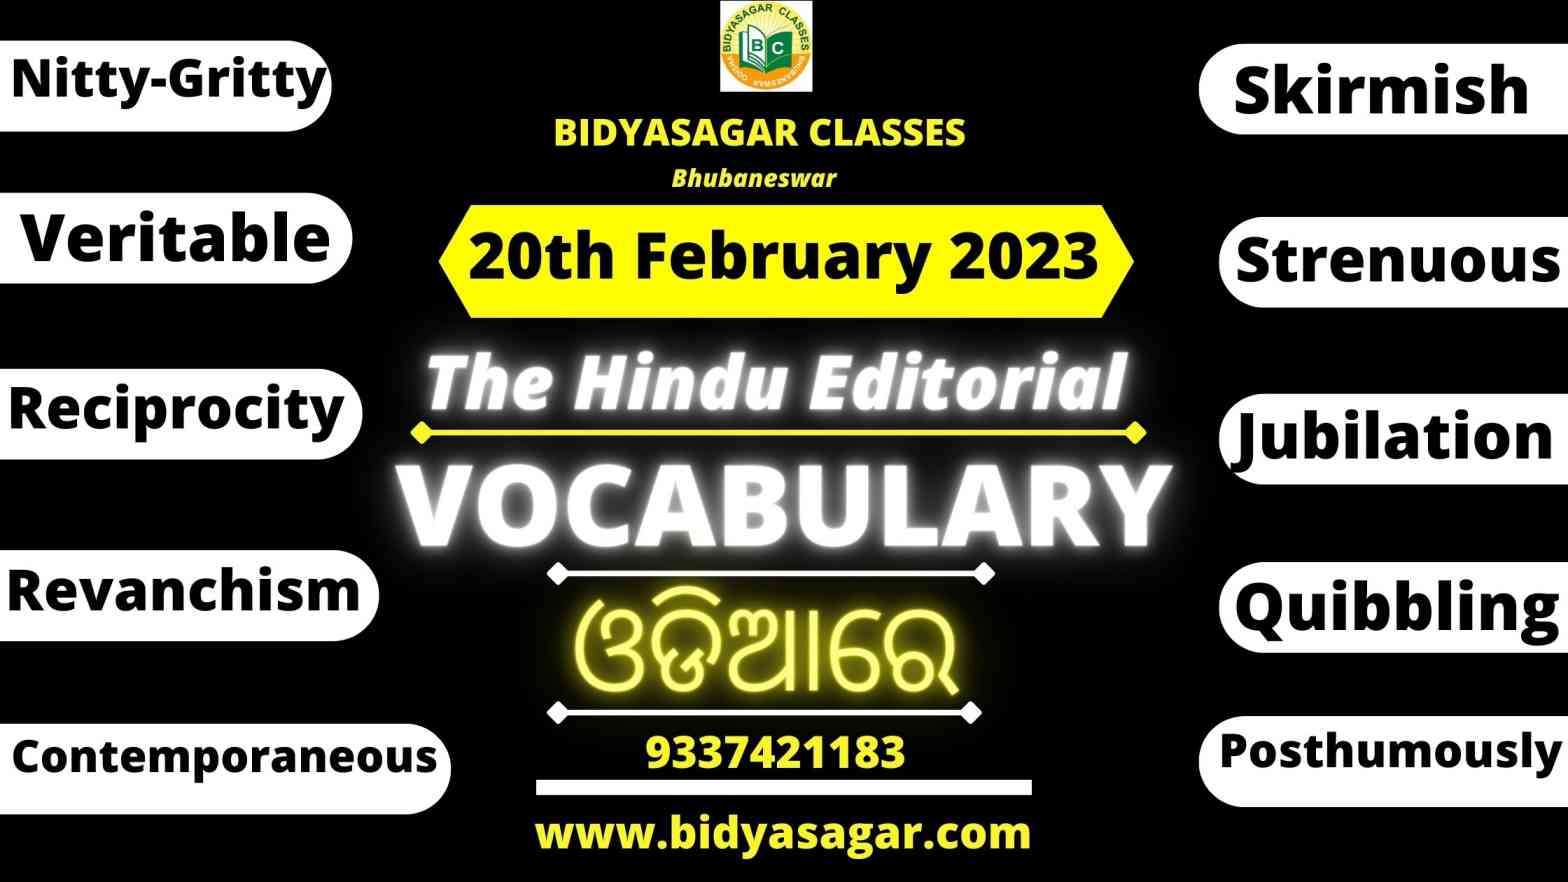 The Hindu Editorial Vocabulary of 20th February 2023